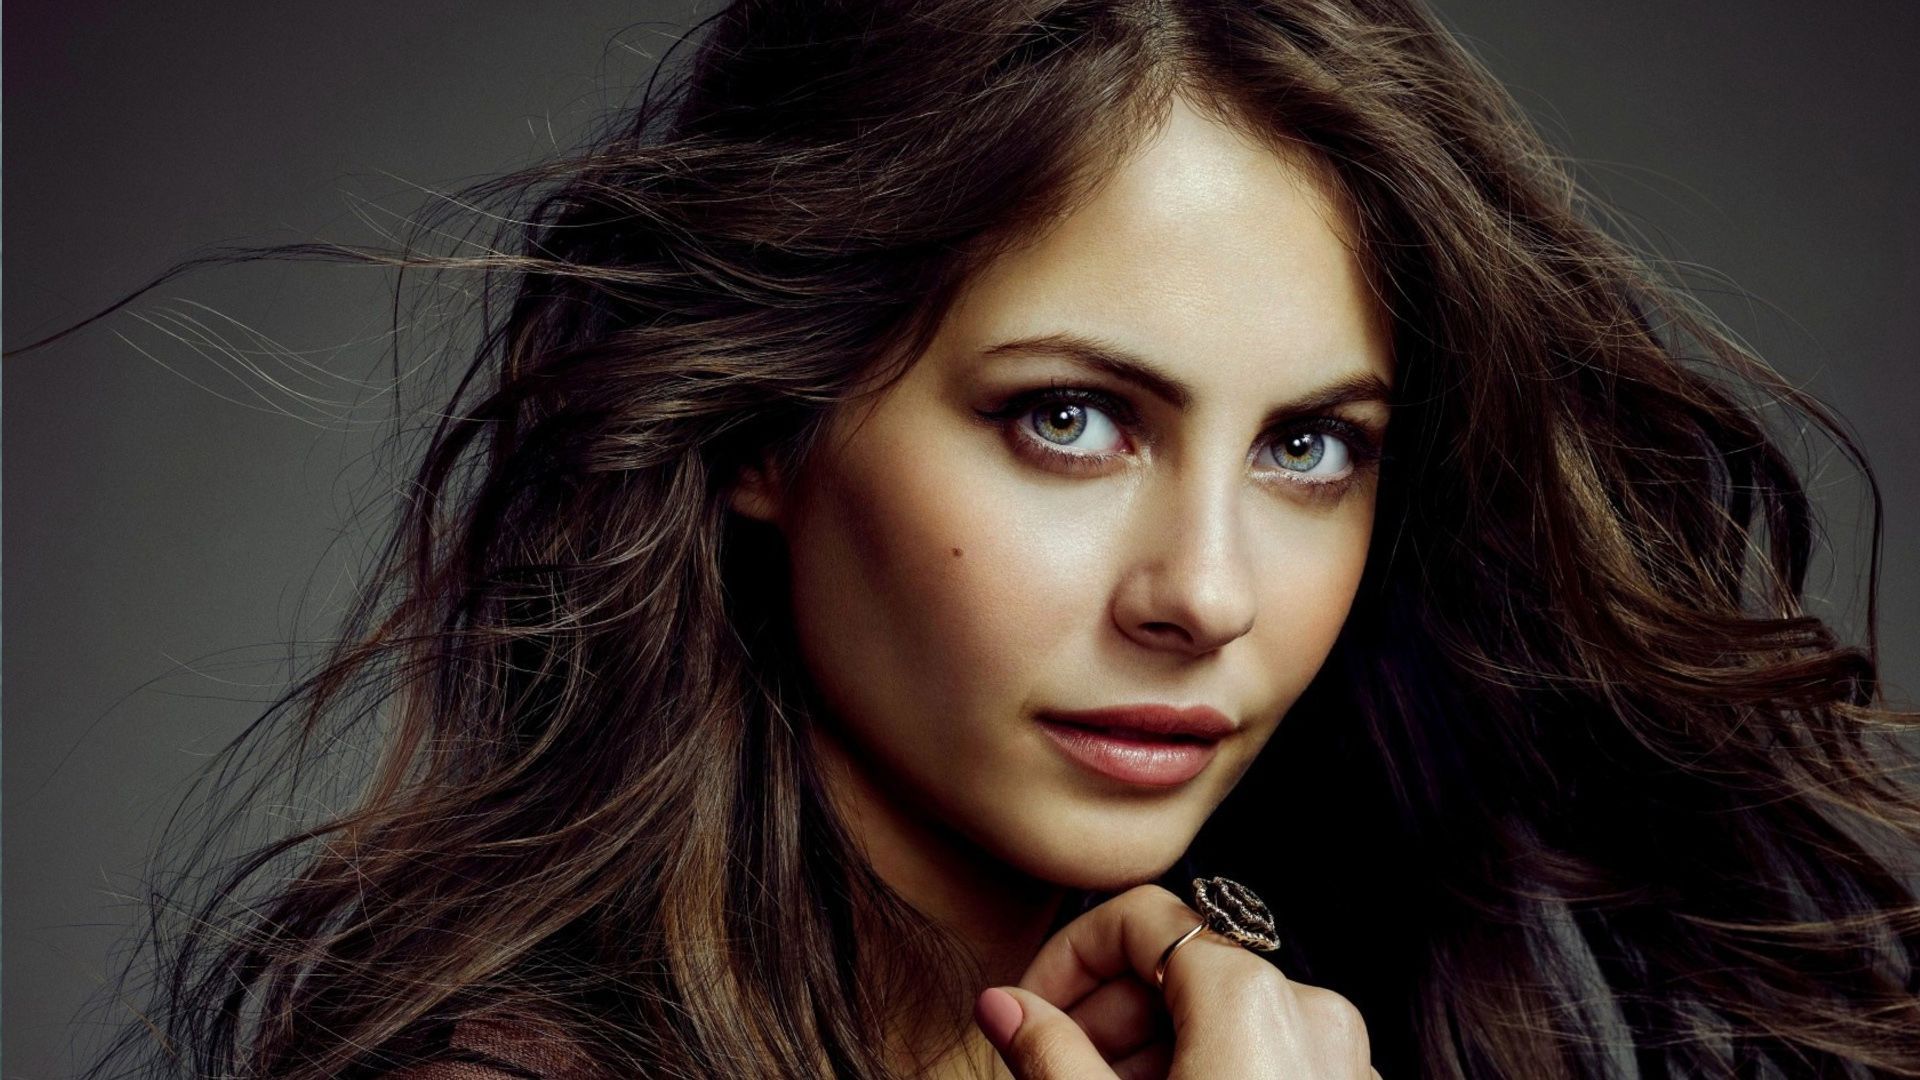 HD Willa Holland Wallpapers HdCoolWallpapers.Com